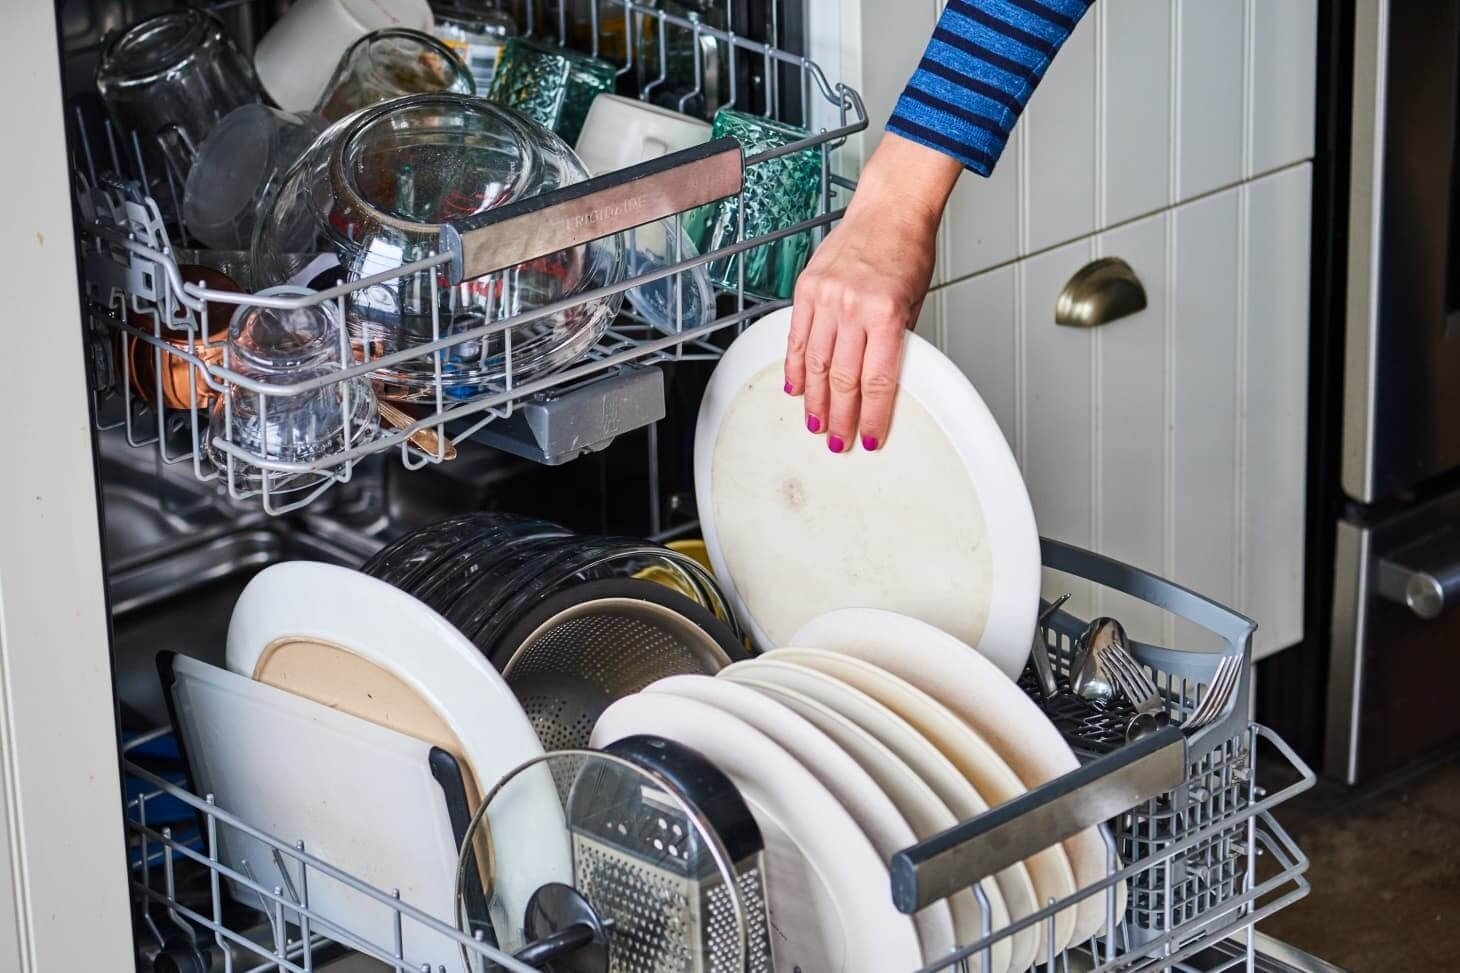 Dicks in the dishwasher onlyfans